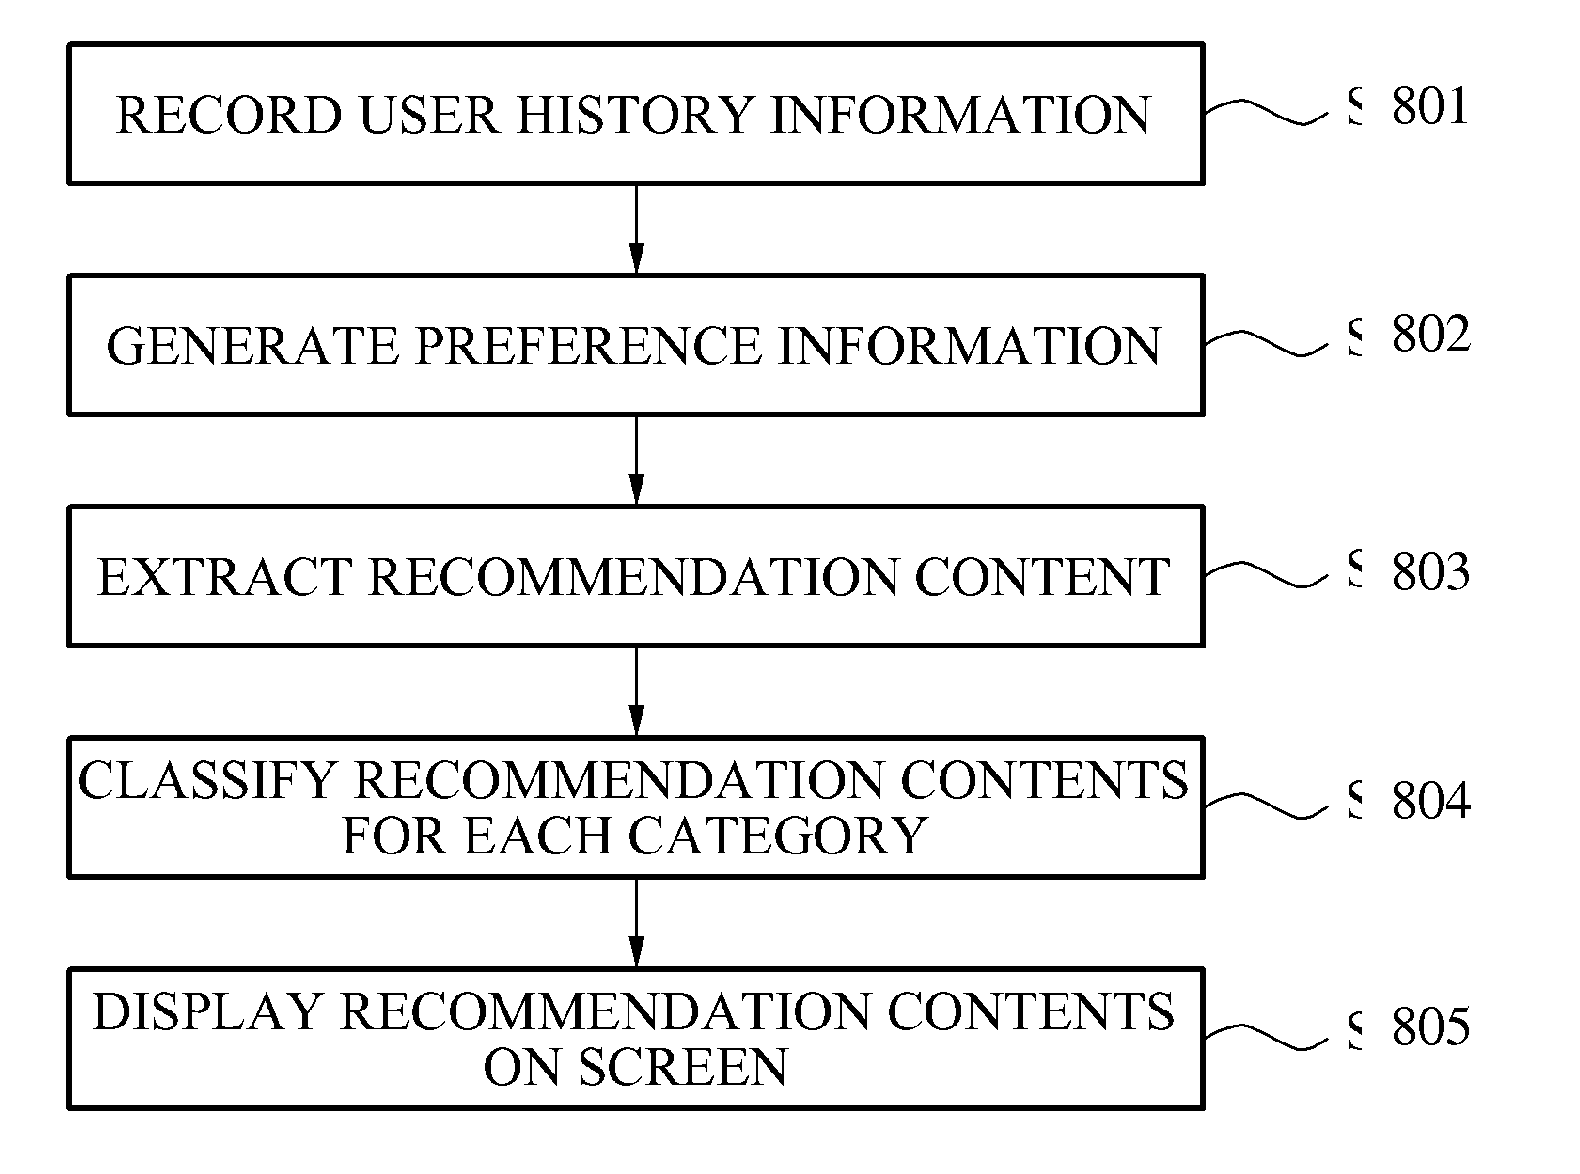 Content recommendation apparatus and method